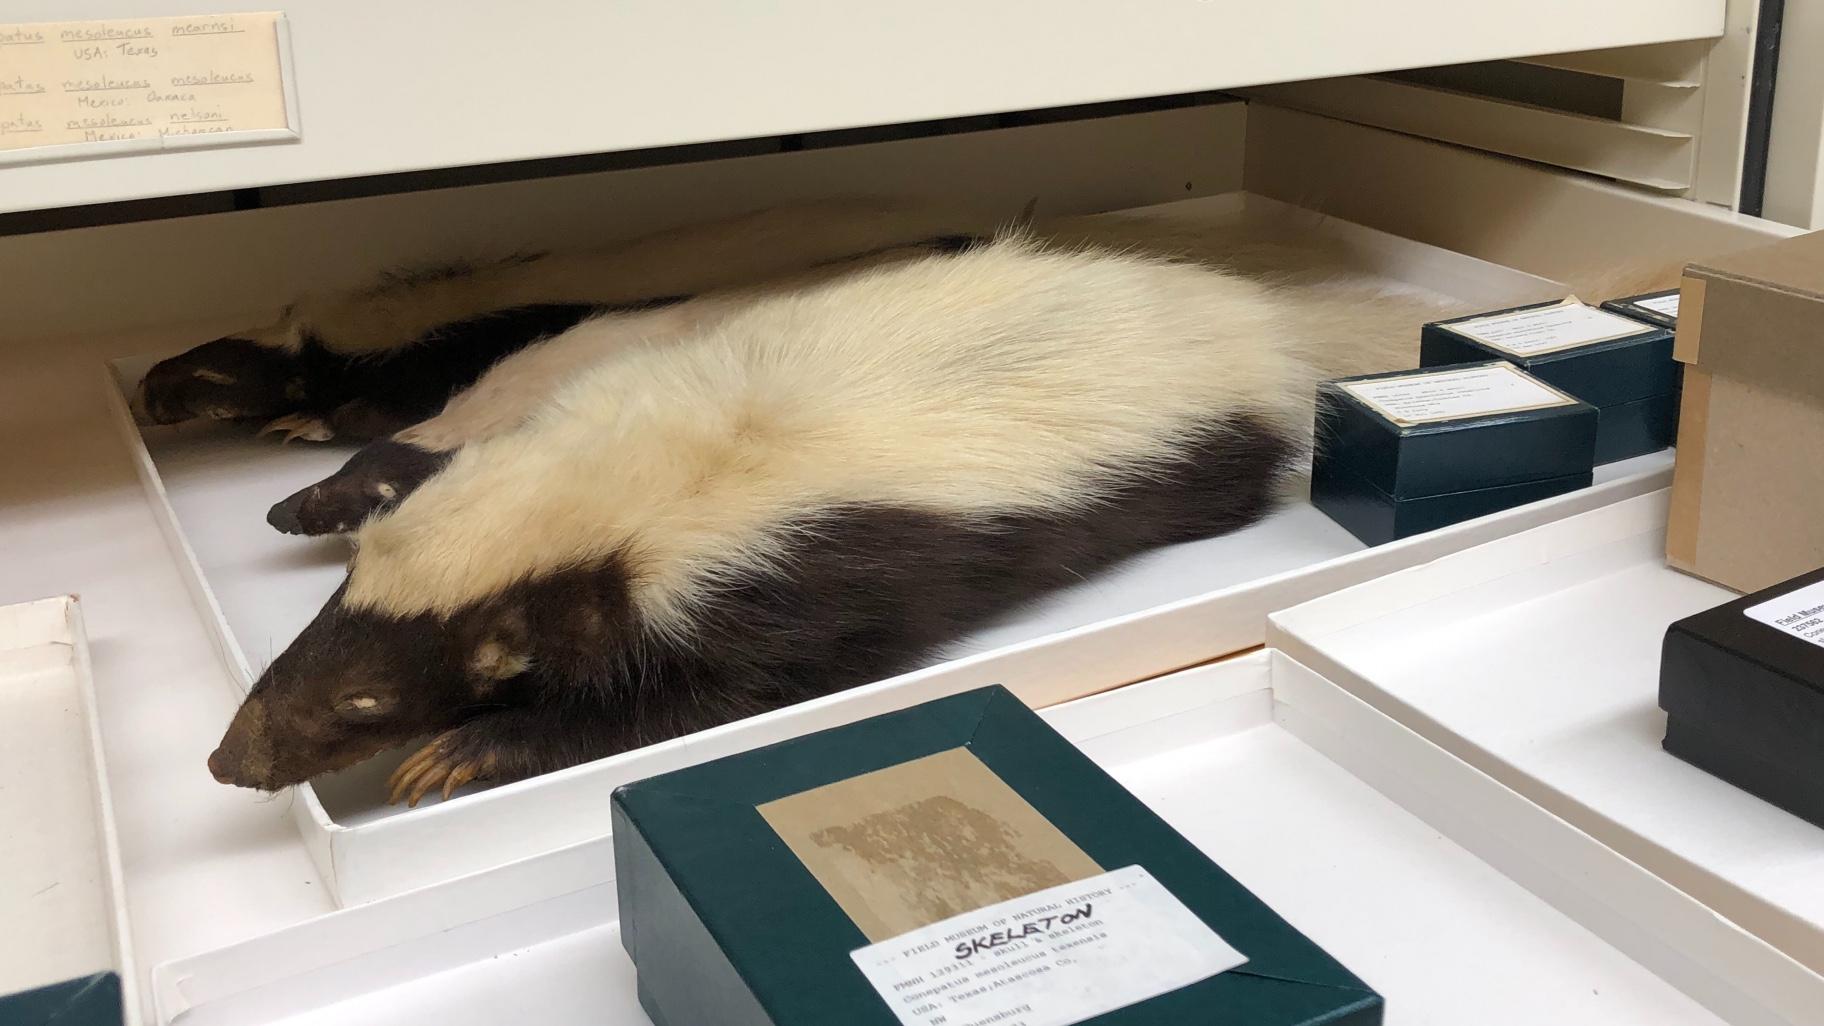 Hog-nose skunks, like the specimen seen here, have the most white and tend to be the largest of the skunk family. (Patty Wetli / WTTW News)